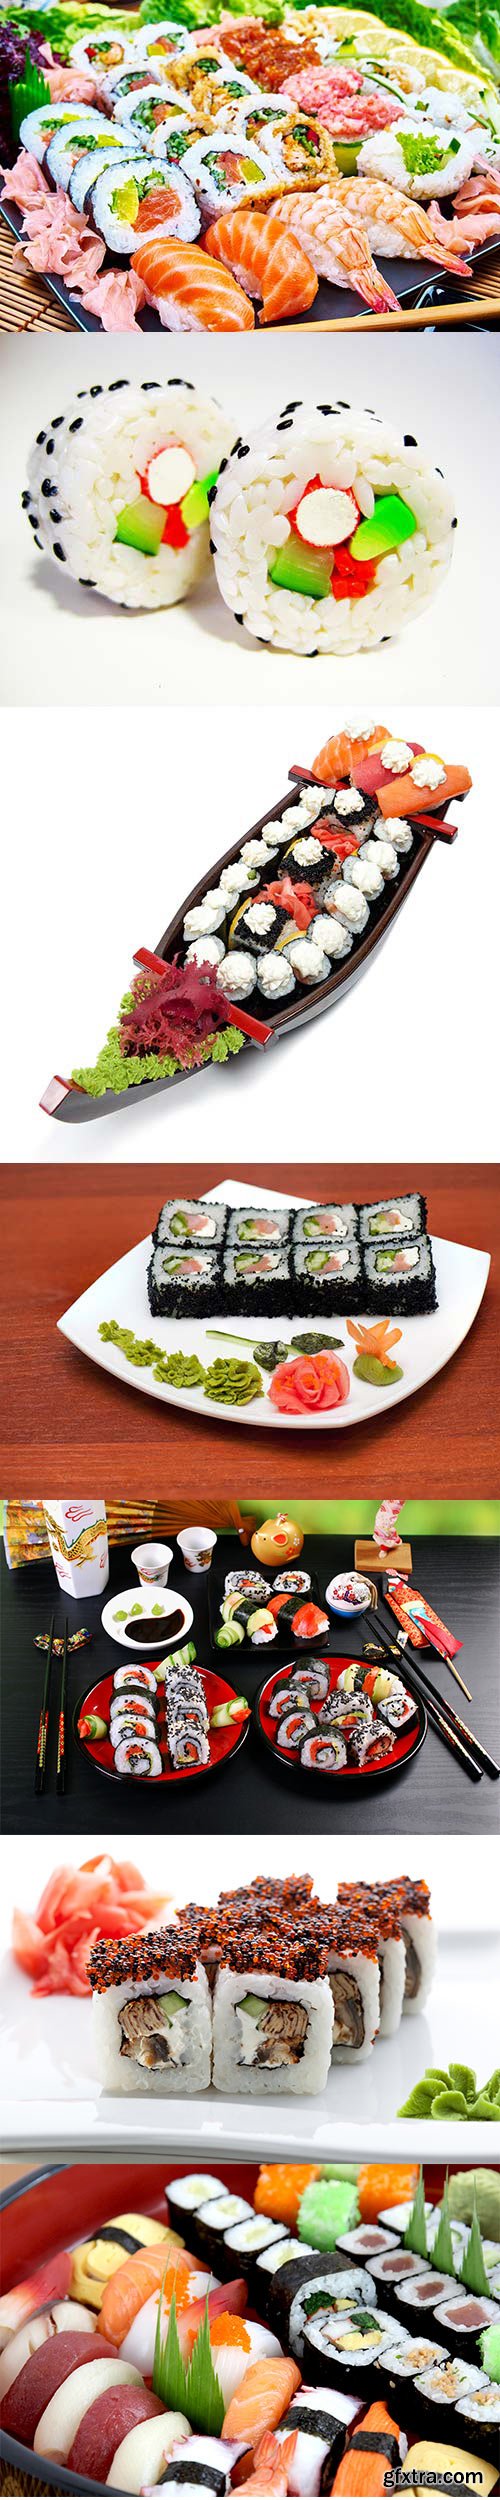 Sushi and rolls are raster graphics